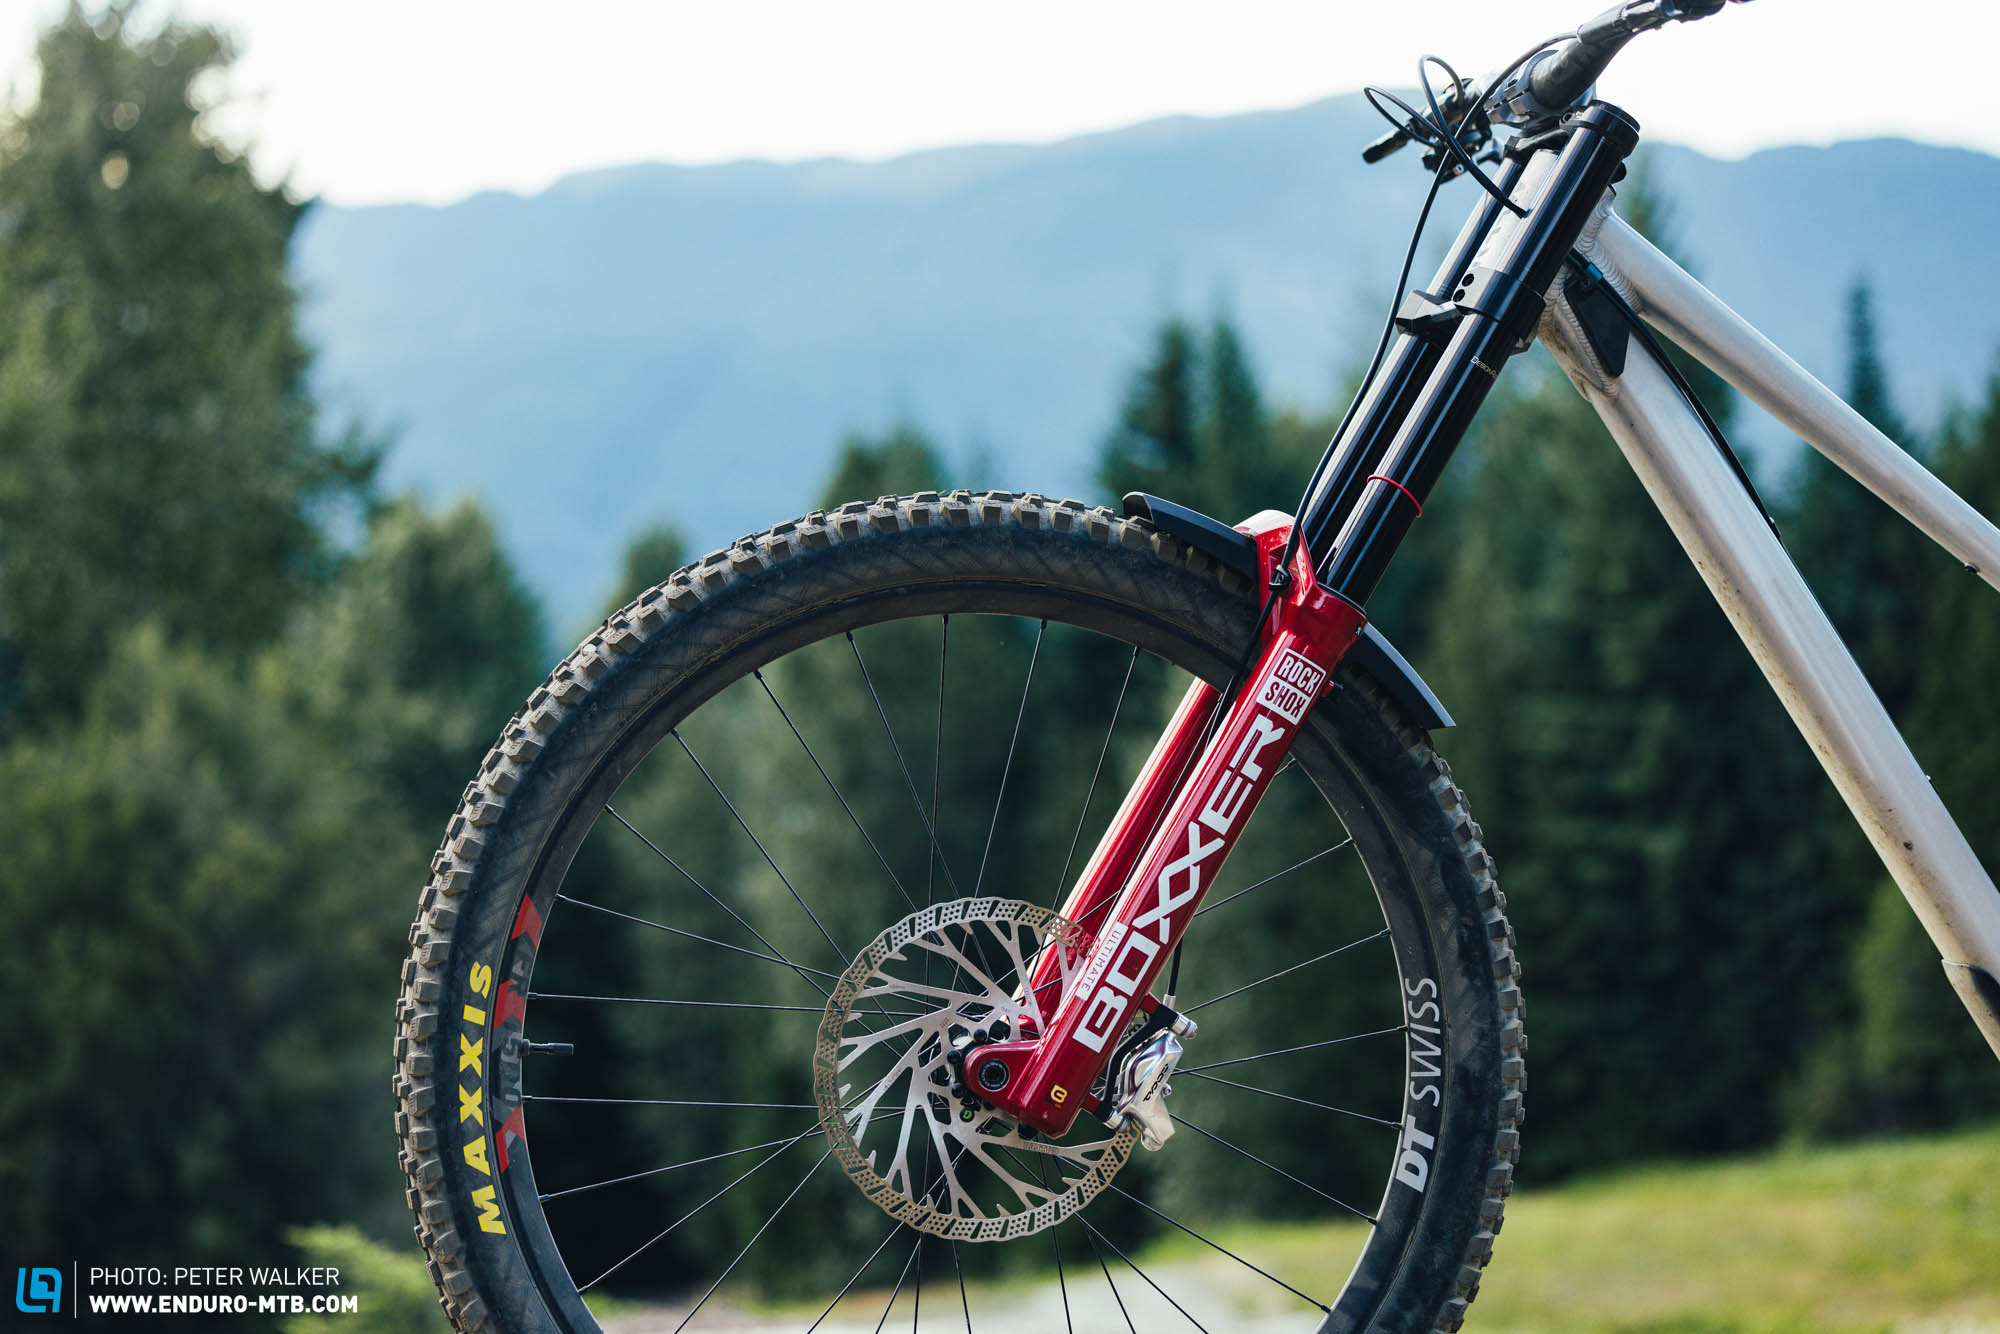 New Rock Shox BoXXer fork first ride review – Smooth operator